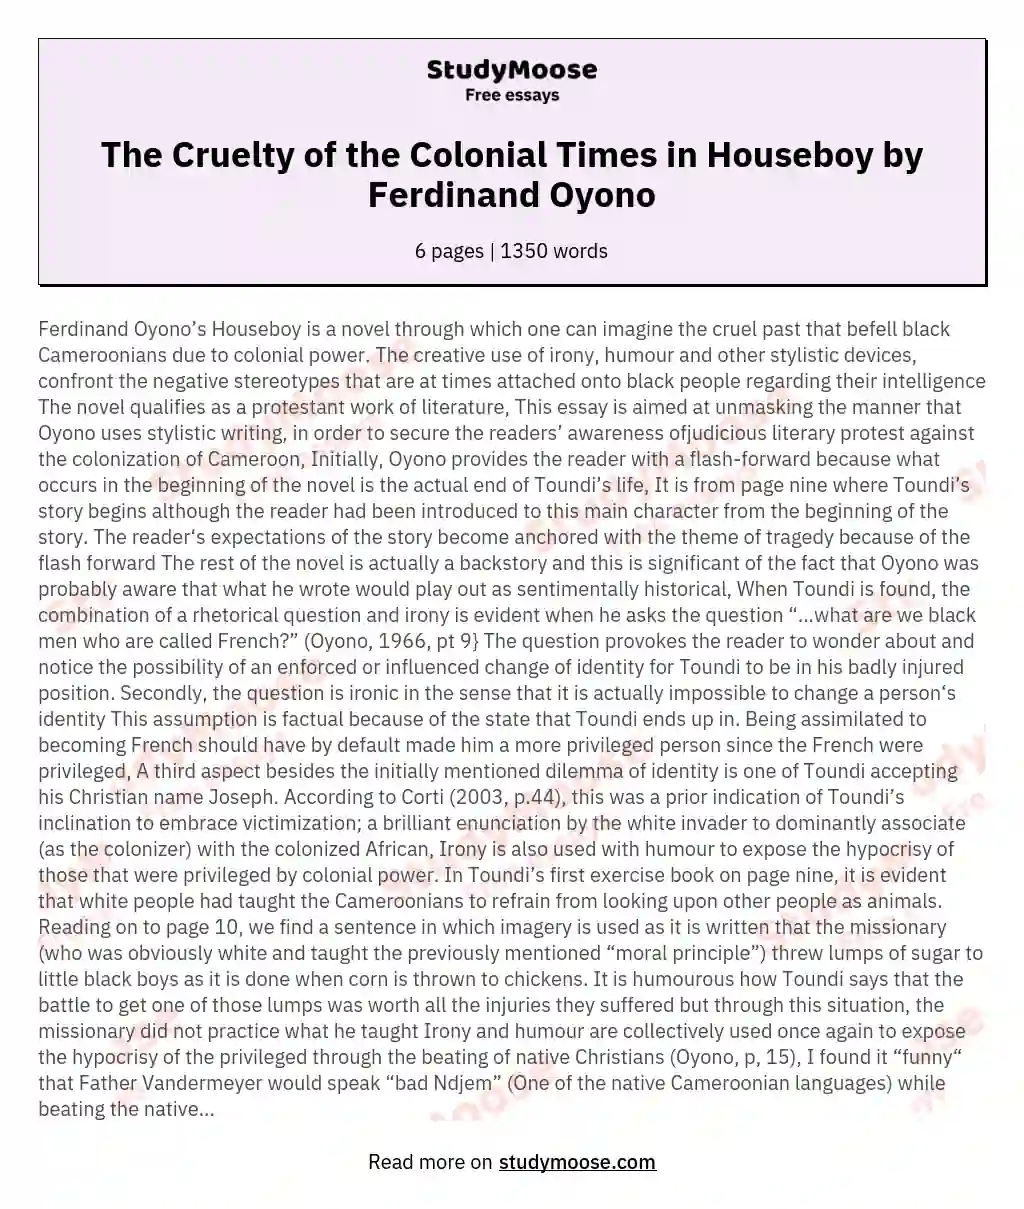 The Cruelty of the Colonial Times in Houseboy by Ferdinand Oyono essay